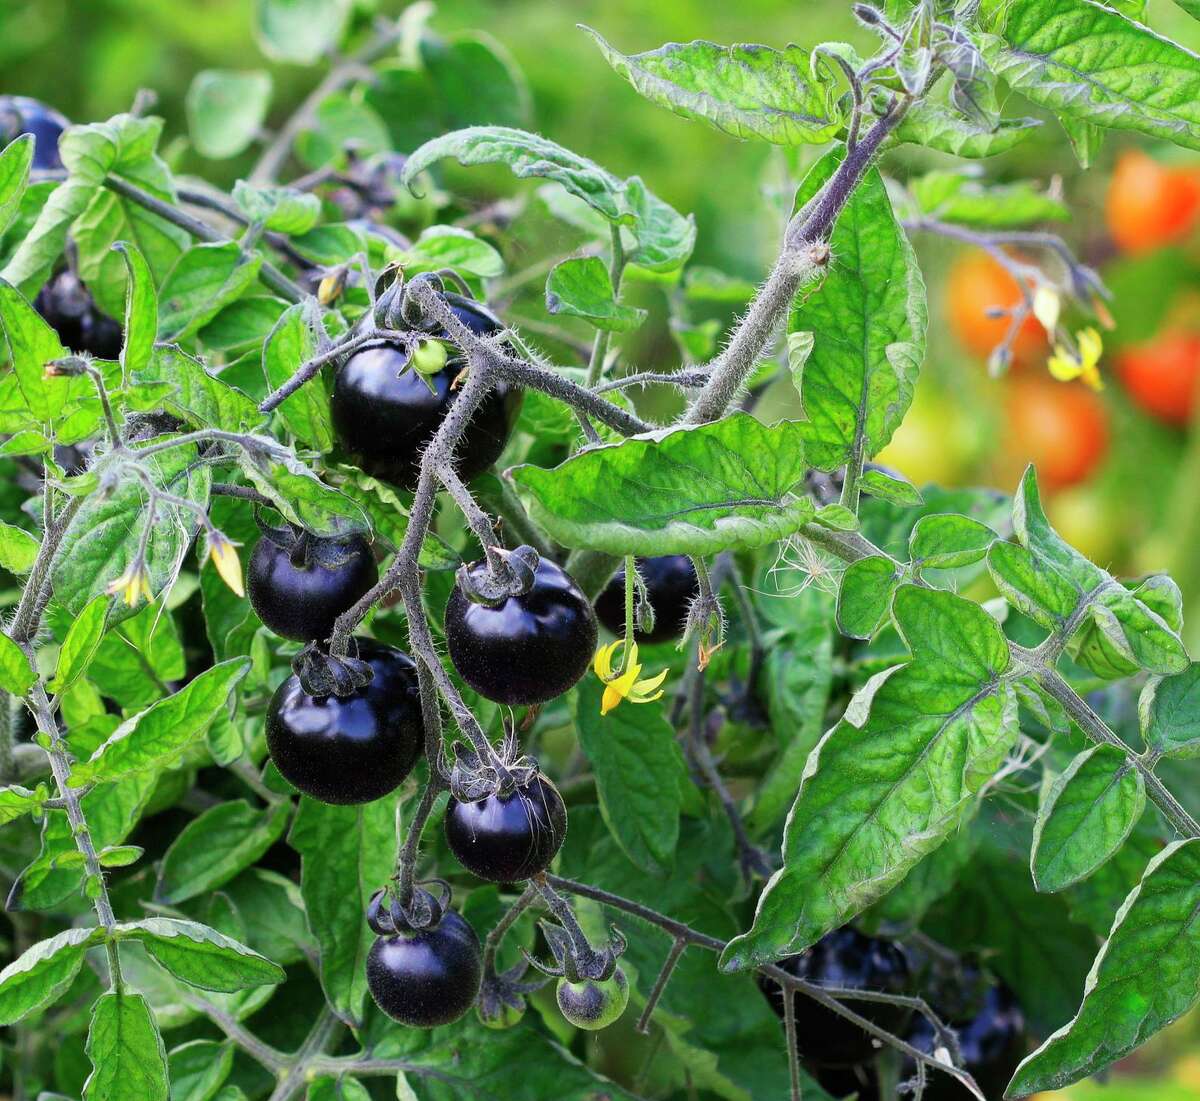 A pioneering blue variety was ‘Indigo Rose,’ a large red cherry tomato that is mostly blue.